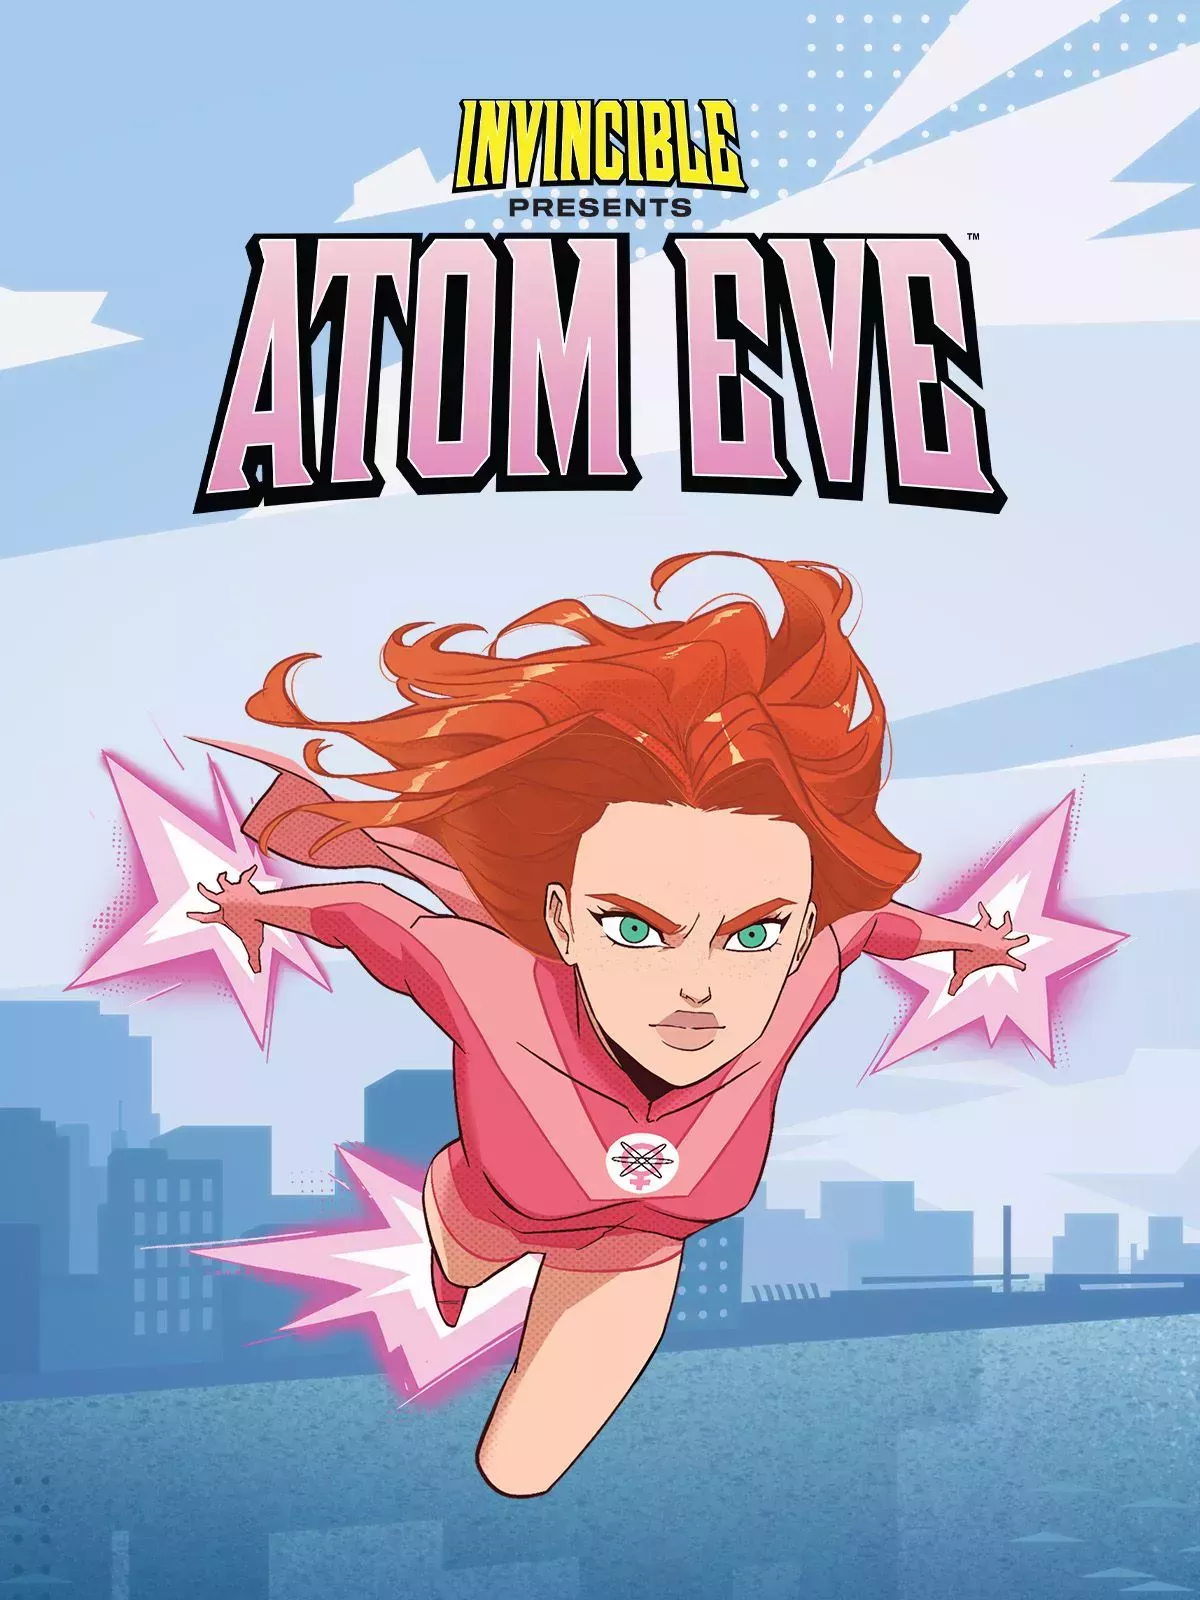 Atom Eve flies at the viewer on the cover of Invincible Presents Atom Eve